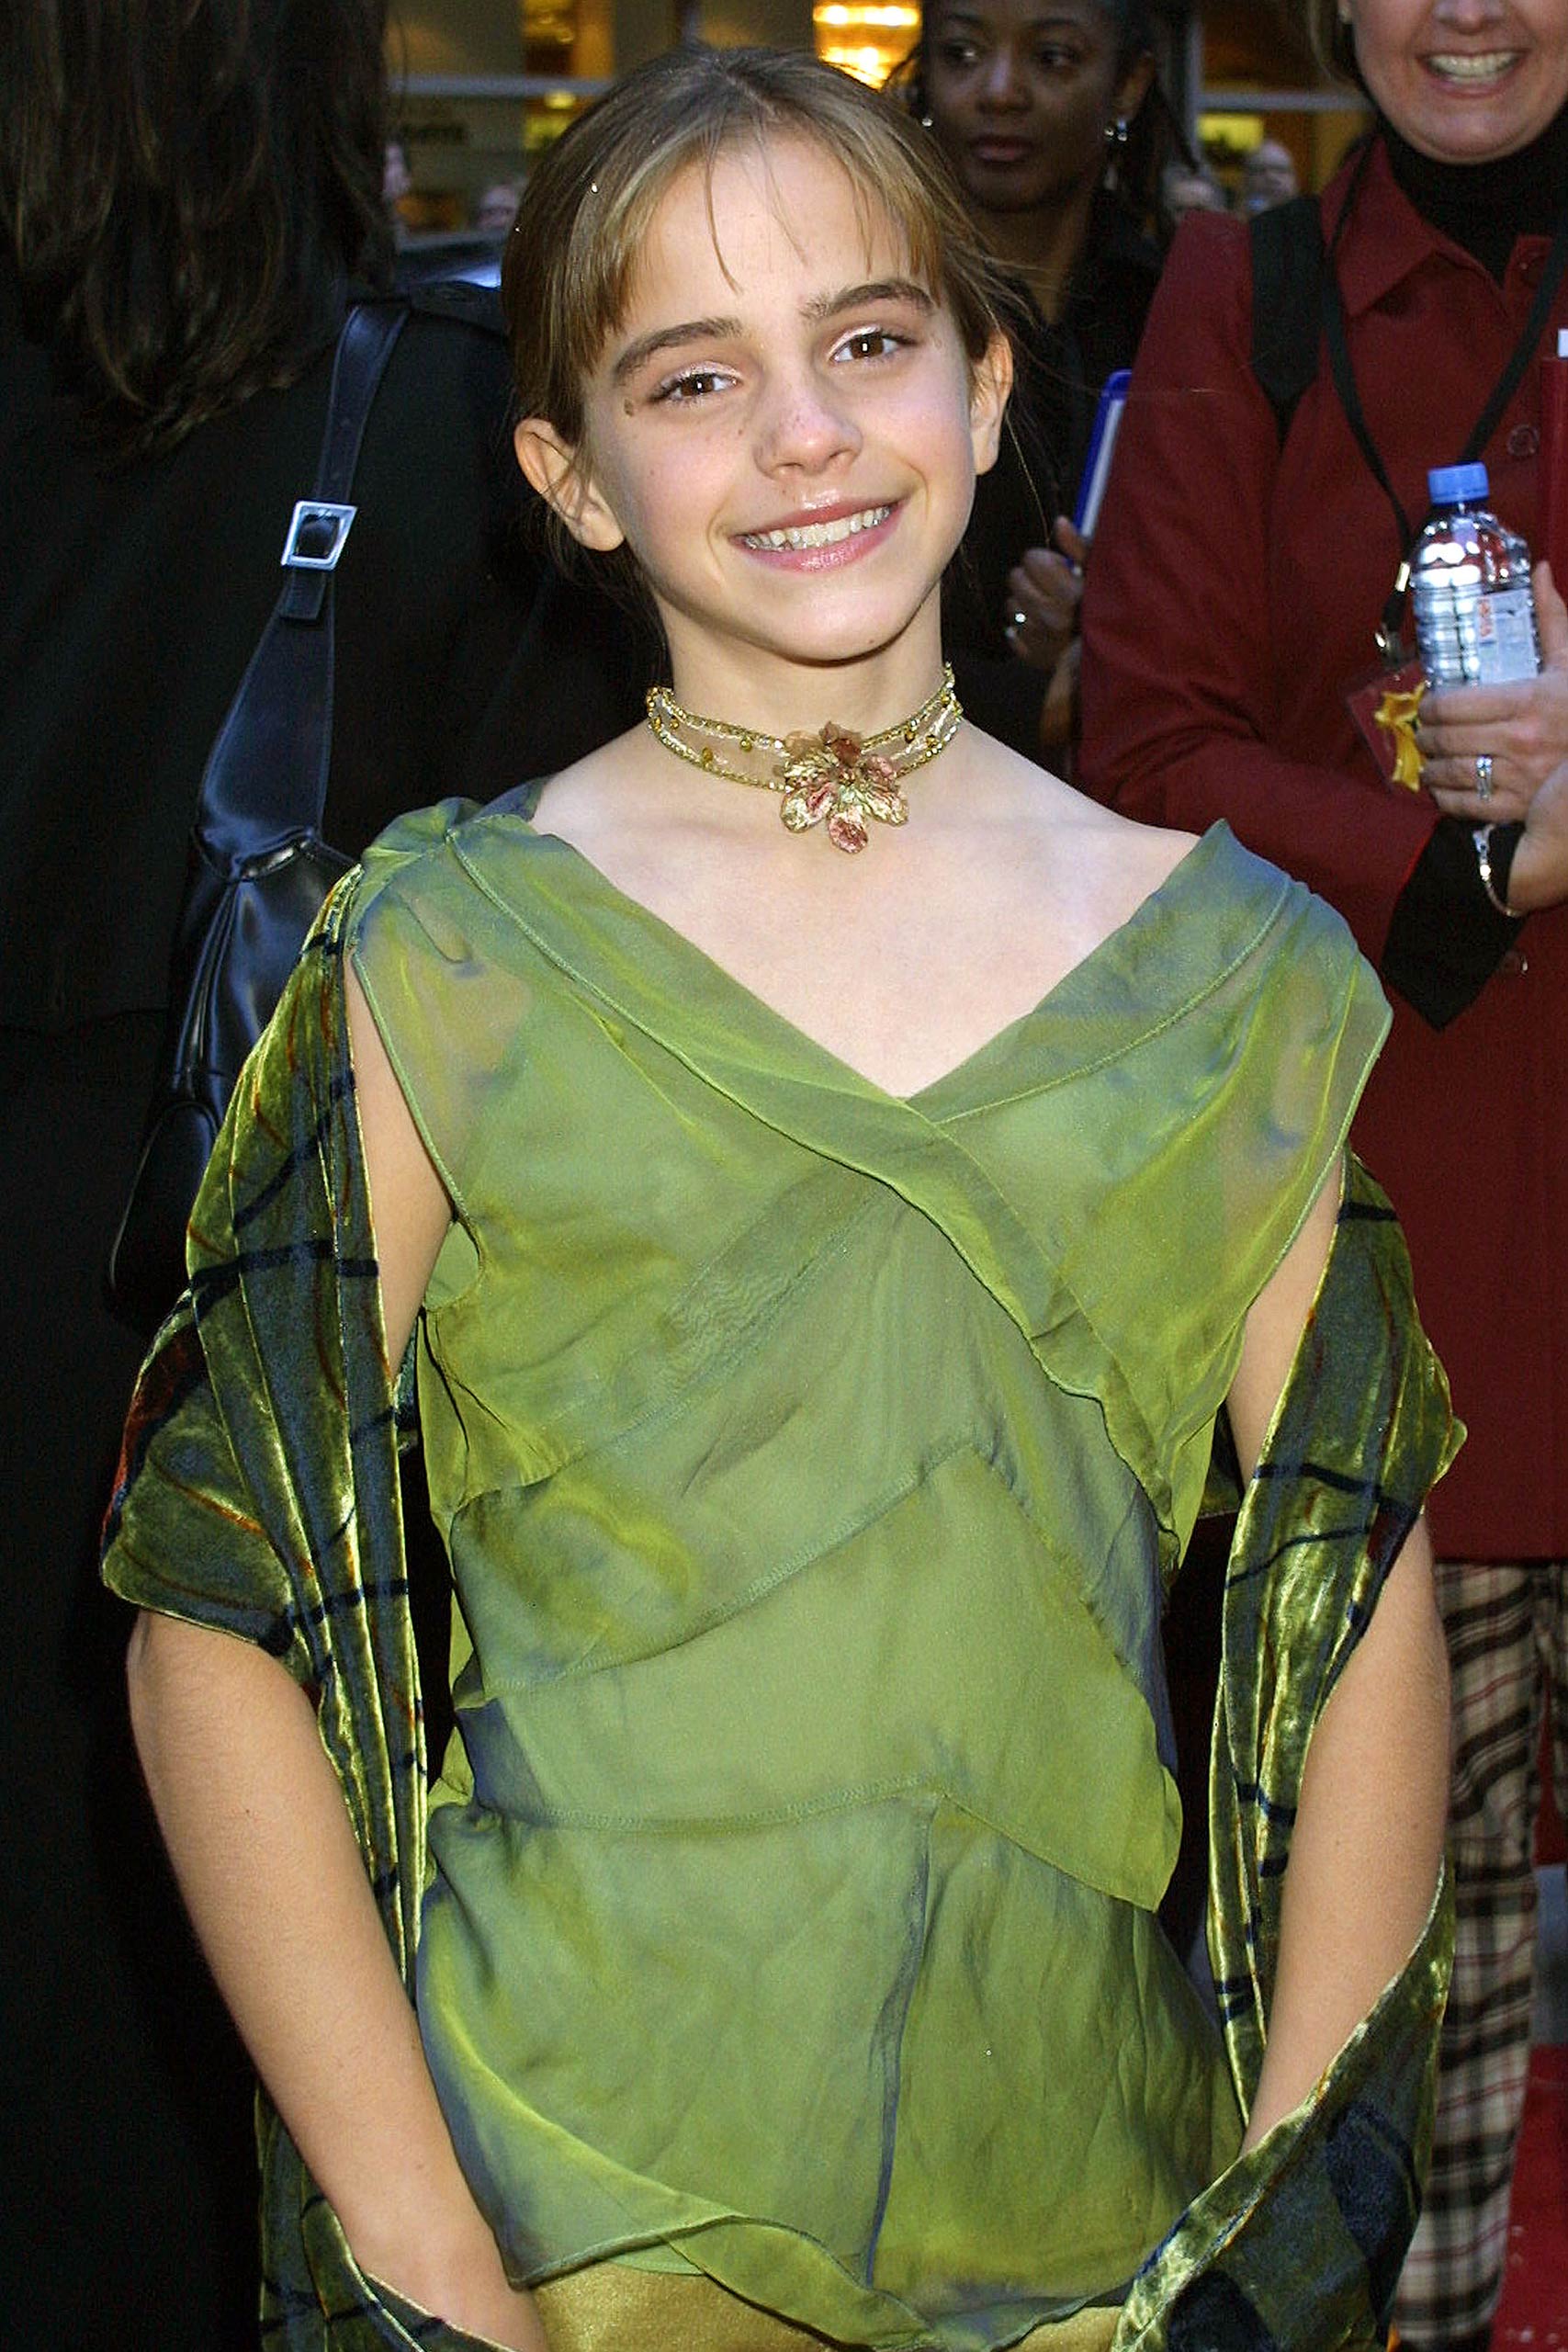 Emma Watson attends the premiere of Harry Potter and the Sorcerer's Stone in 2001 at the Ziegfeld Theatre in New York.